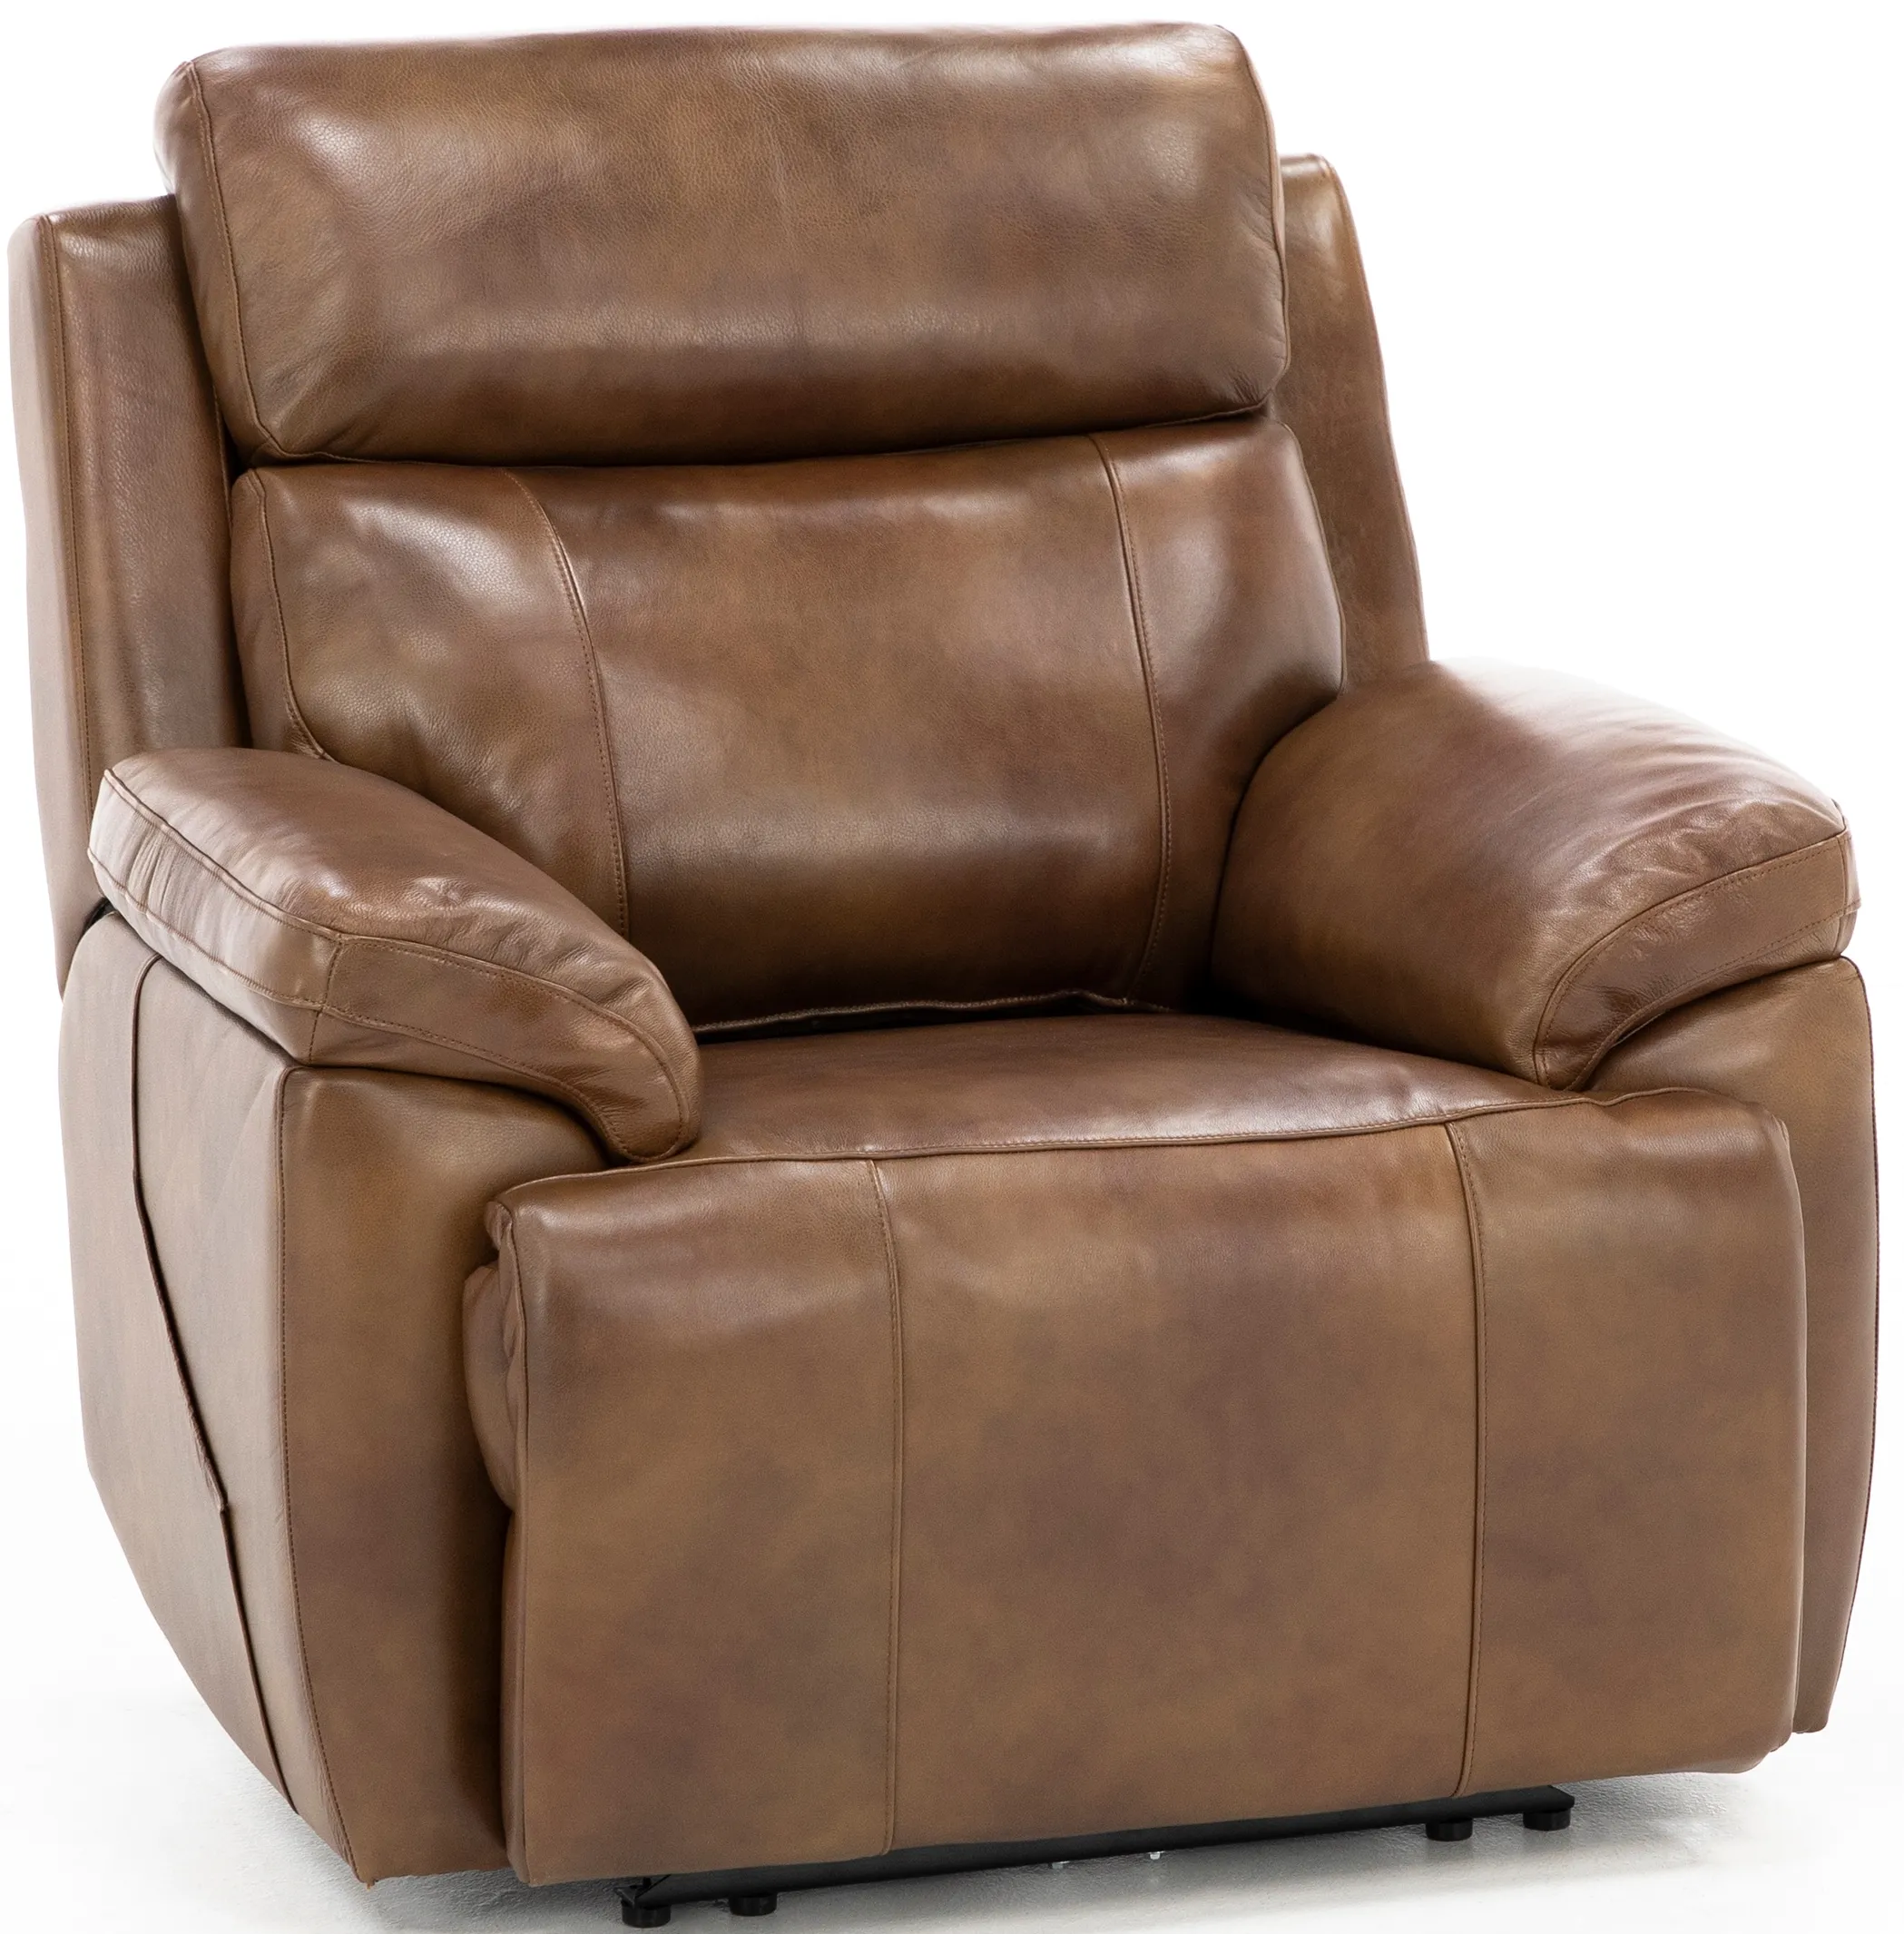 Direct Design Evanston Leather Fully Loaded Recliner with Air Massage in Caramel